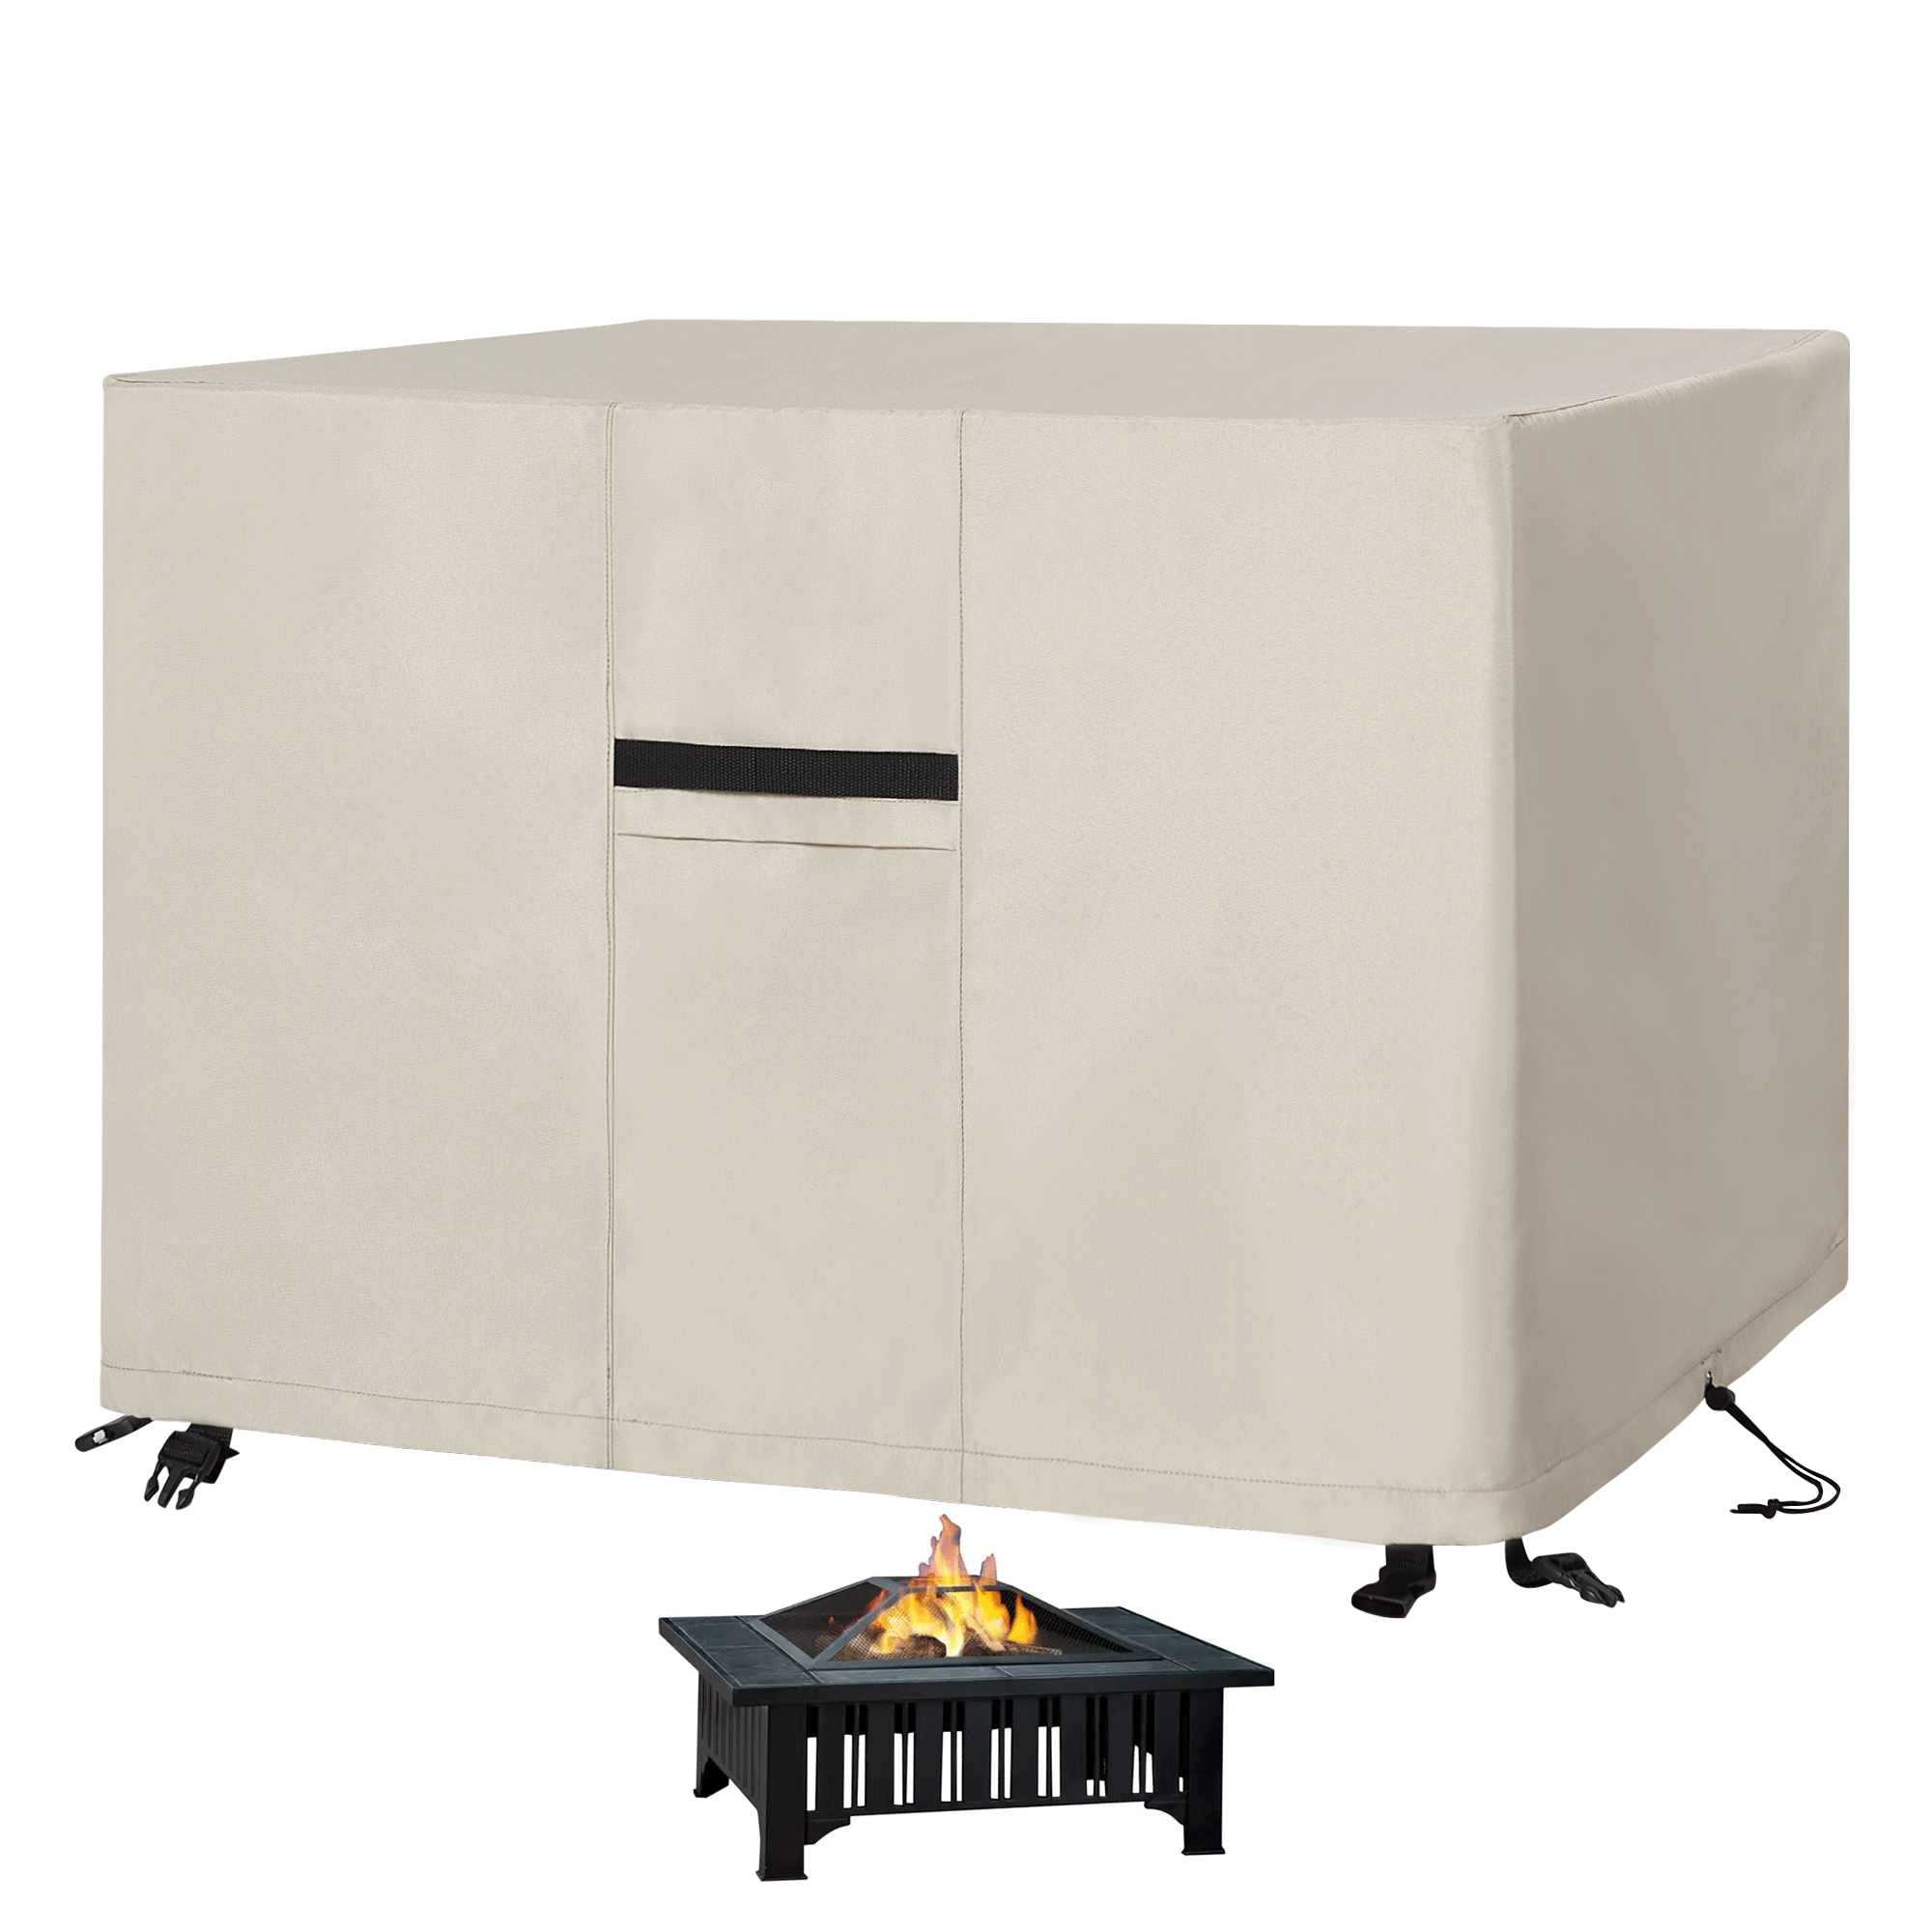 Outdoor Fire Pit Covers with Drawstring Waterproof Dustproof Wood Burning Fire Stove Cover for Patio Firepit KGORGE Store